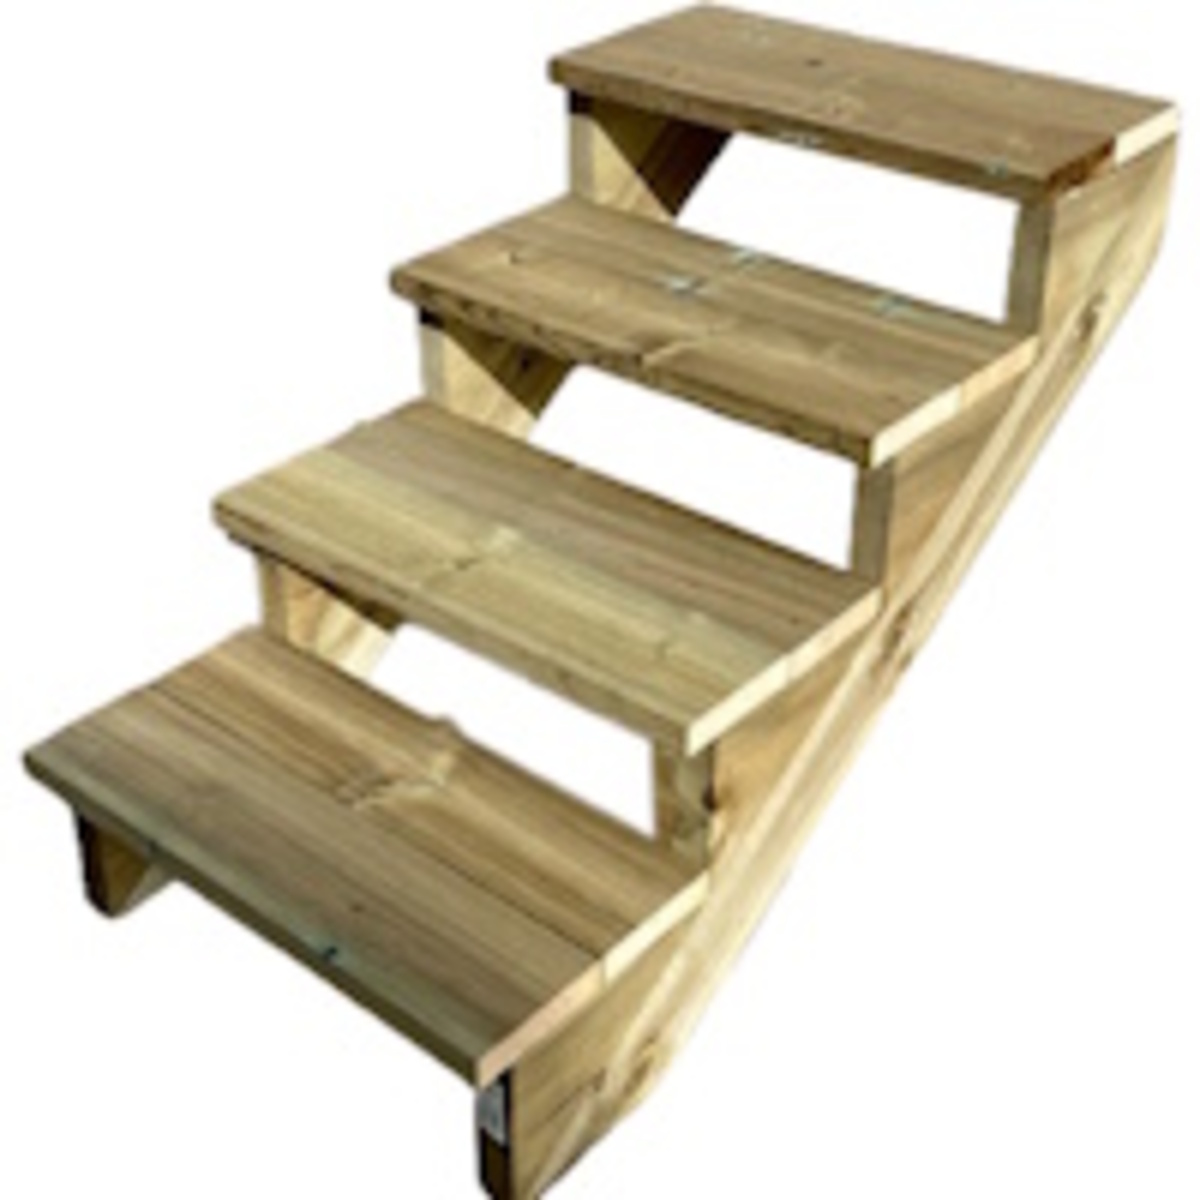 Deck stairs wood 4 steps type C - height 71cm